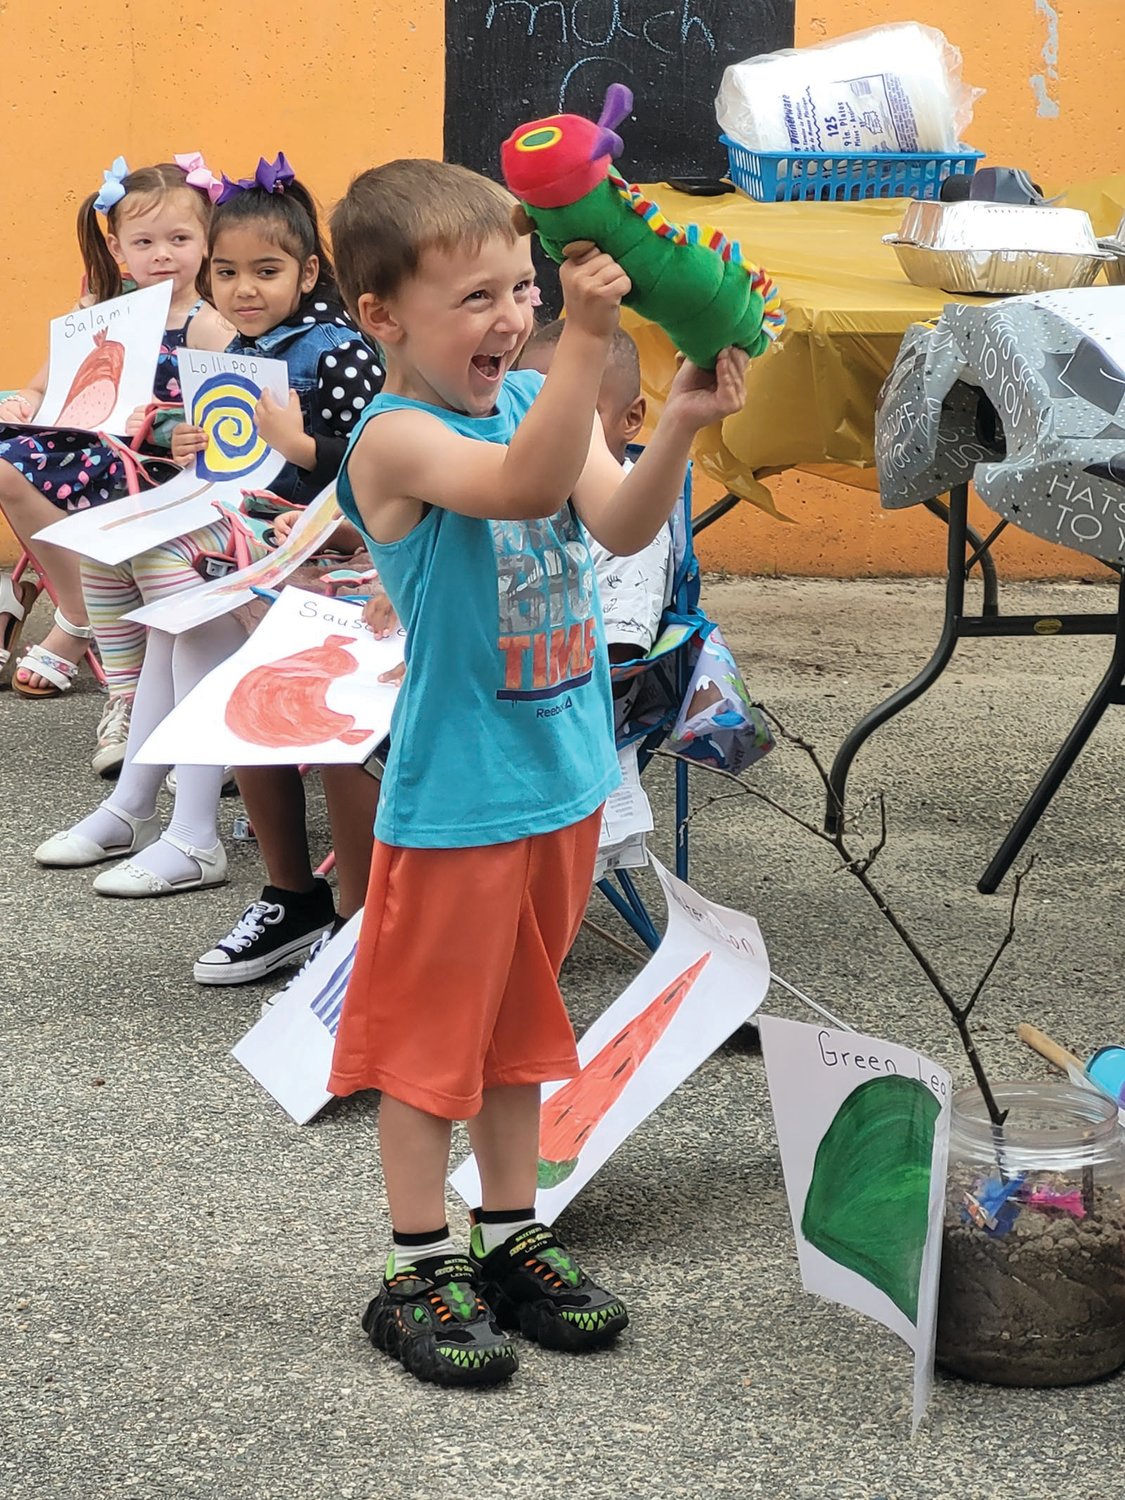 CERTIFIED PRE-K: Ms. Robin and Ms. Michaela’s RI State Pre-K Class celebrated their graduation to Kindergarten during a ceremony and show last week. They read and acted out “The Very Hungry Caterpillar” by Eric Carle.